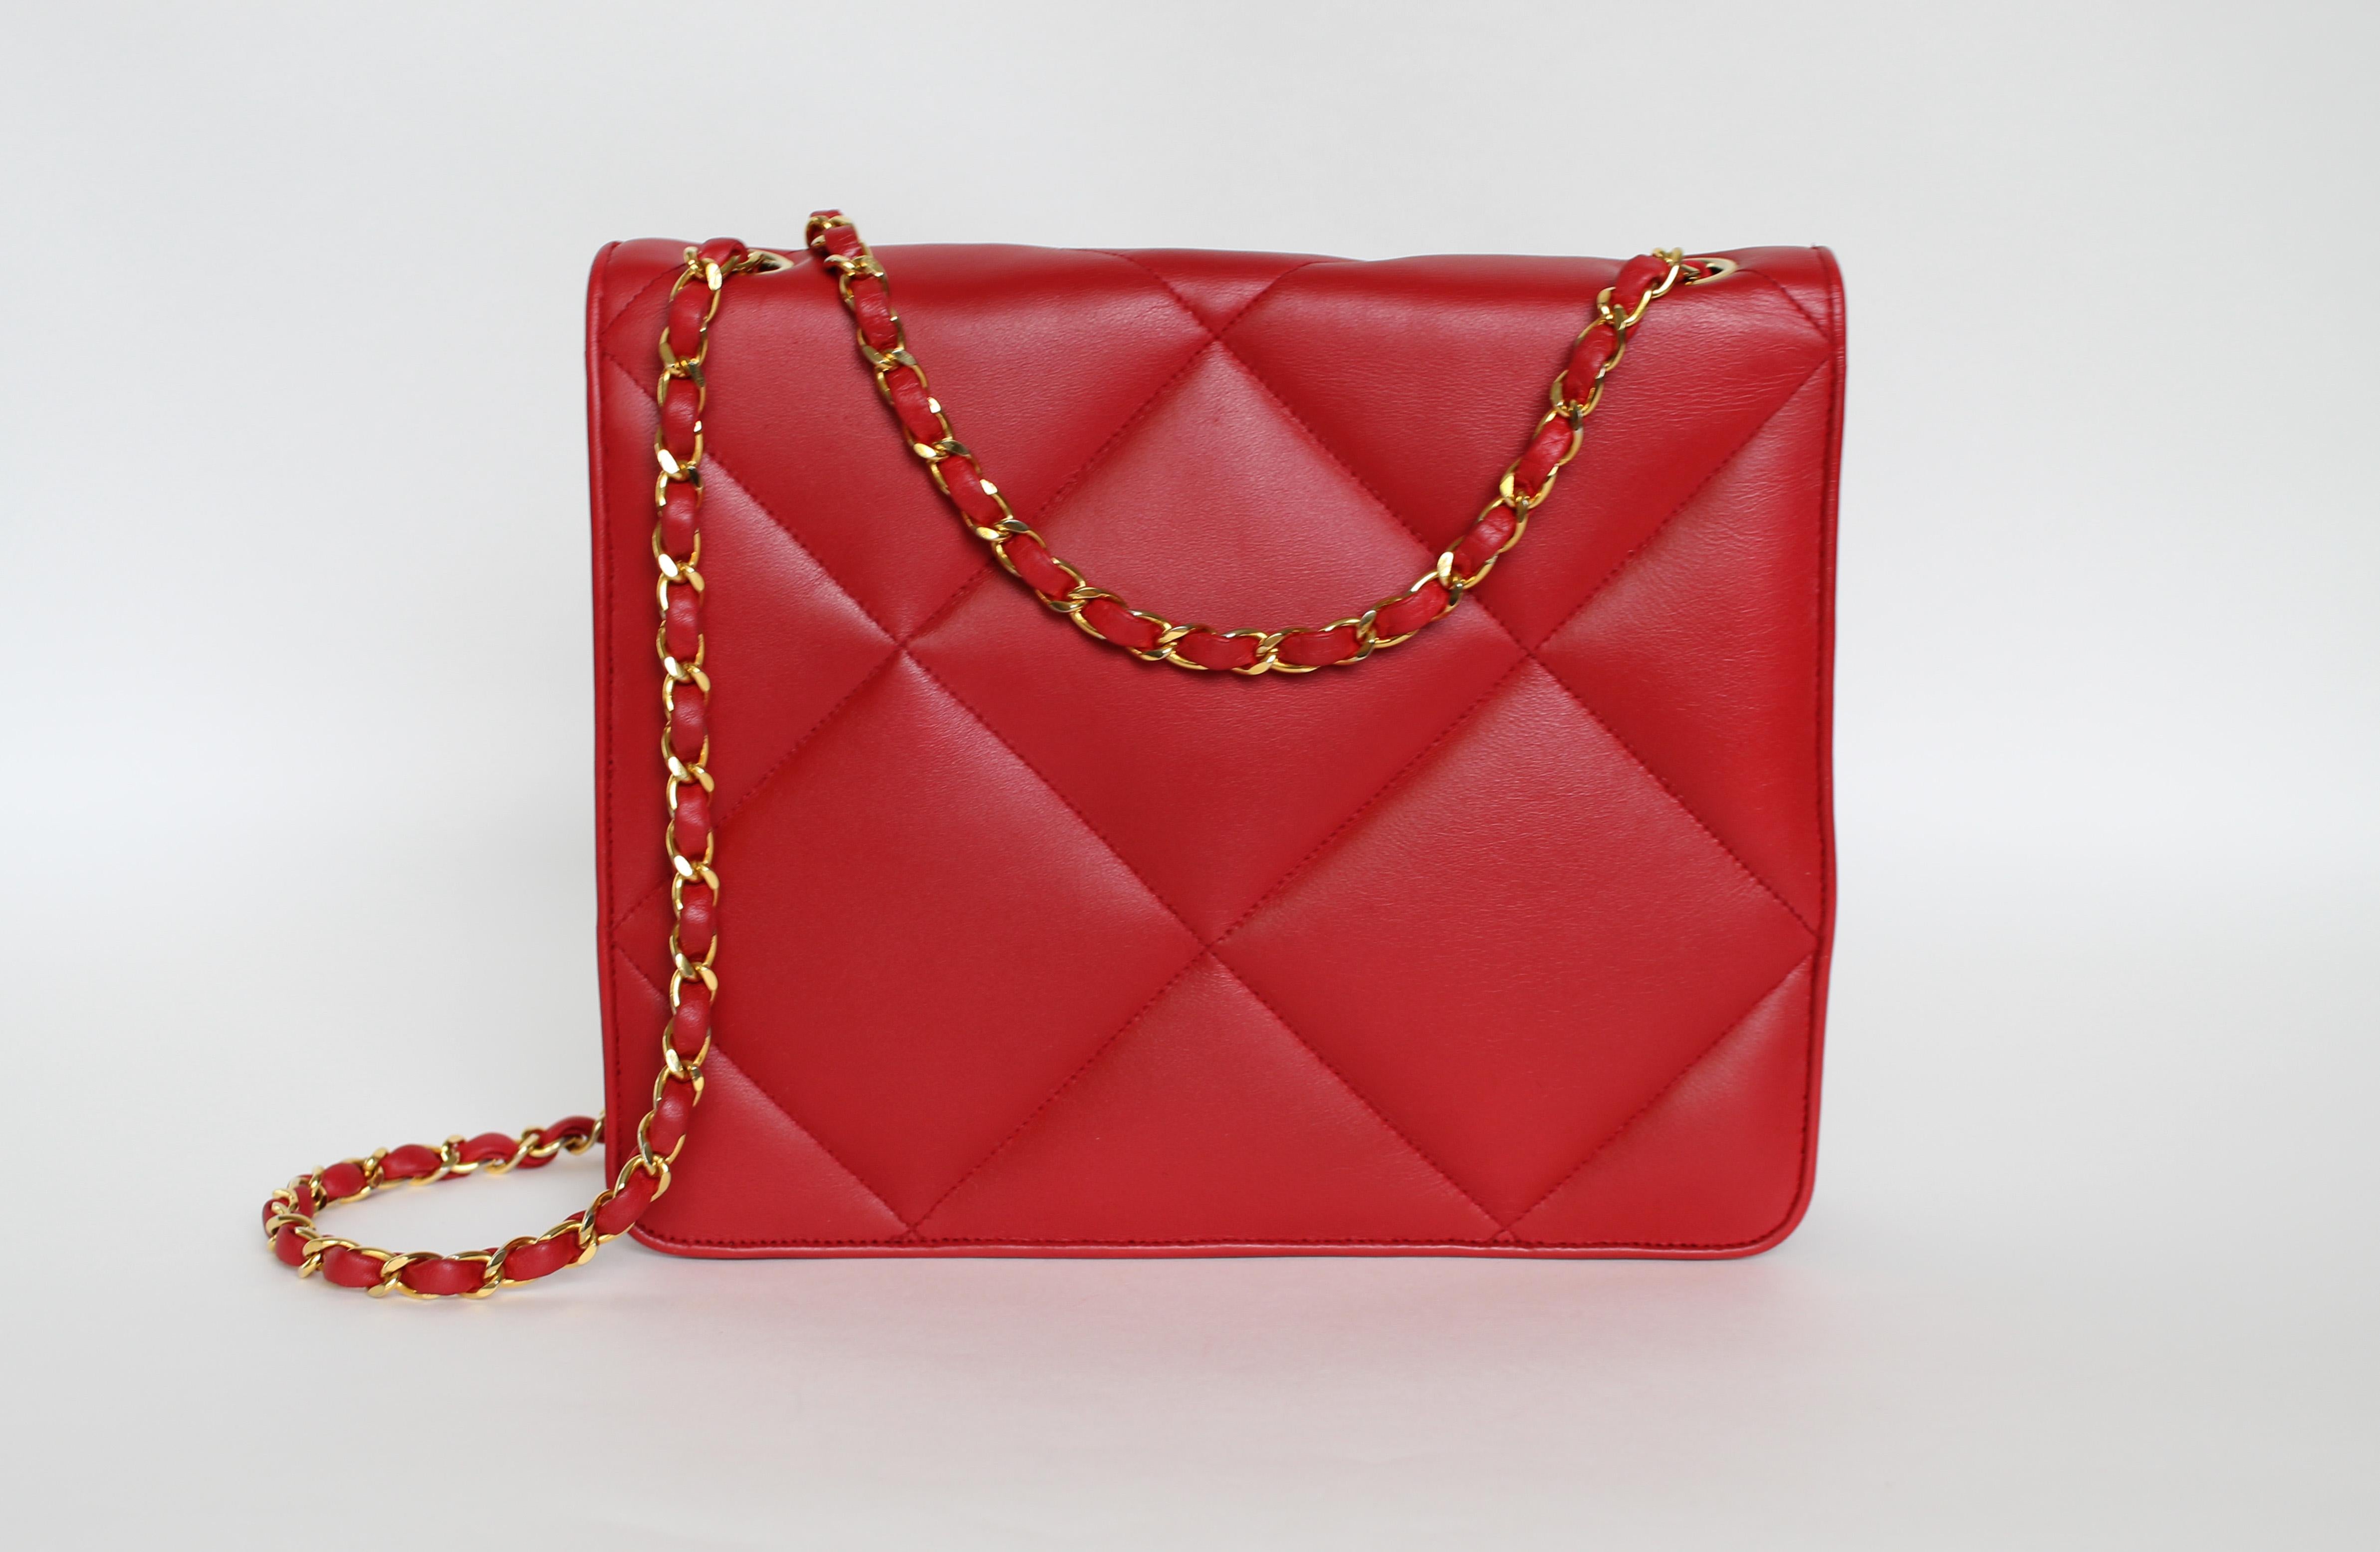 Classic Chanel 19 Vintage Rare 90s Jumbo Lambskin Red Envelope Flap Bag  For Sale 3